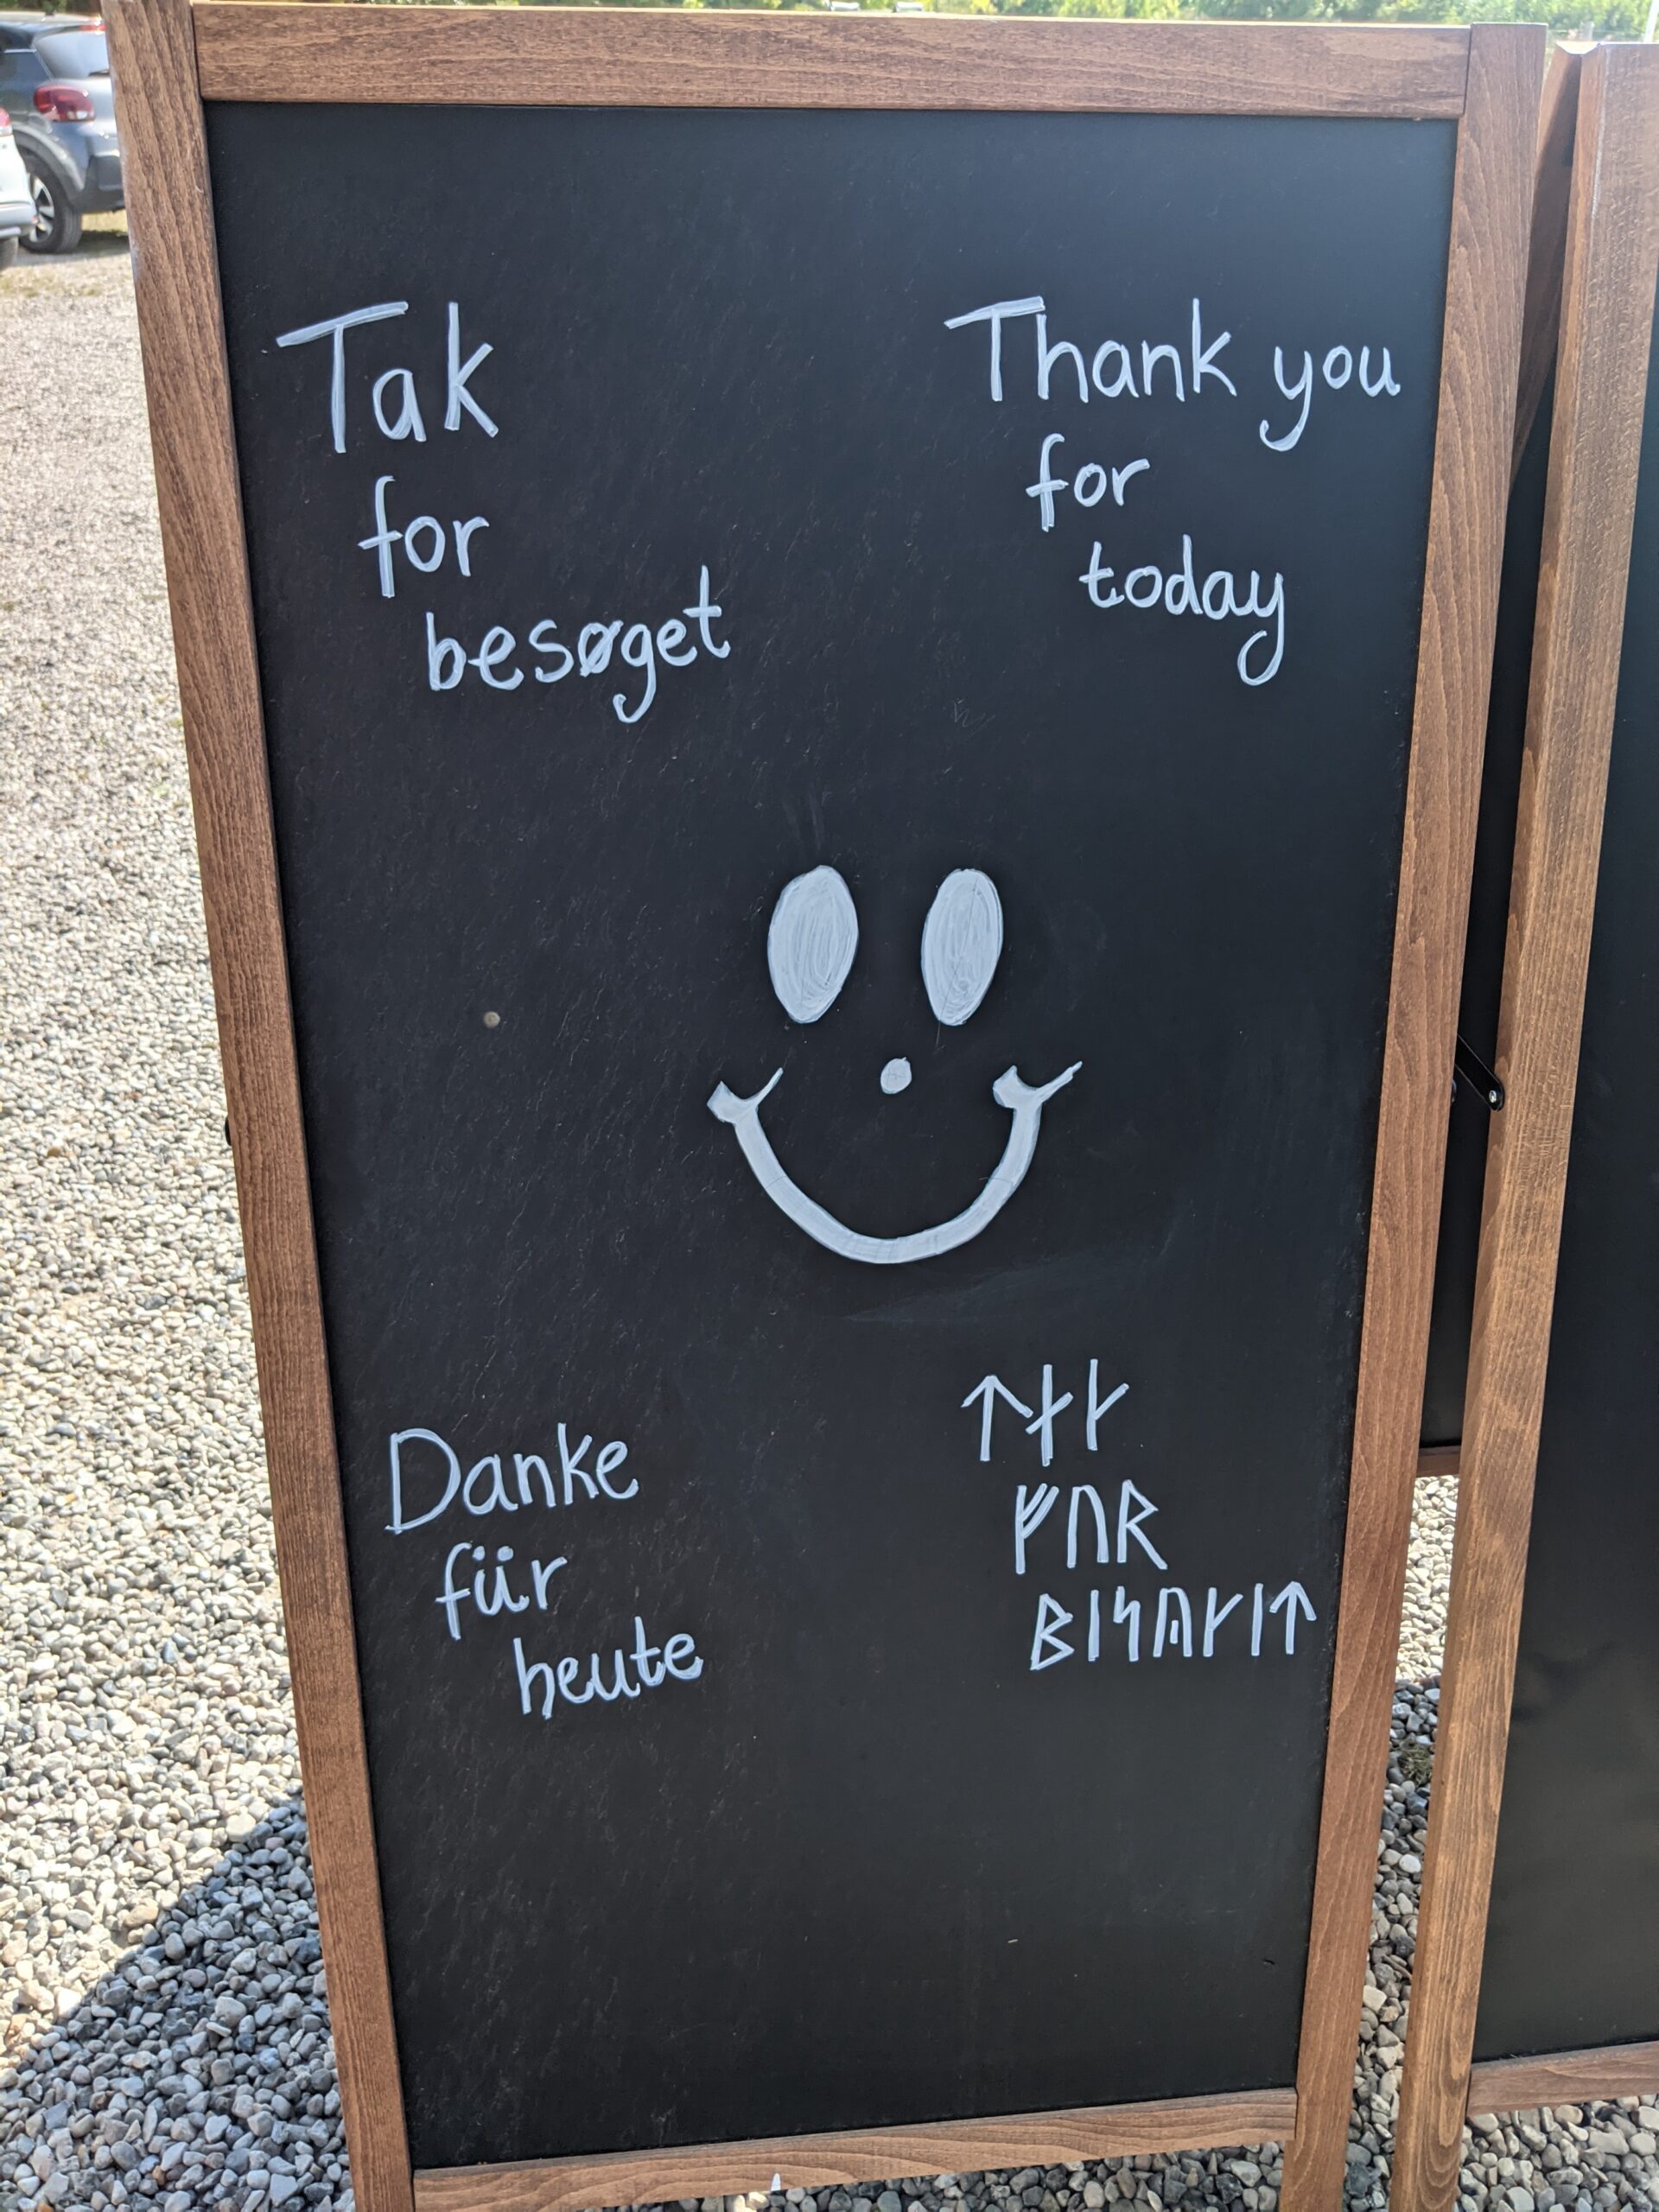 A sign that says "Thank you for today" in Danish, German, English and in runes